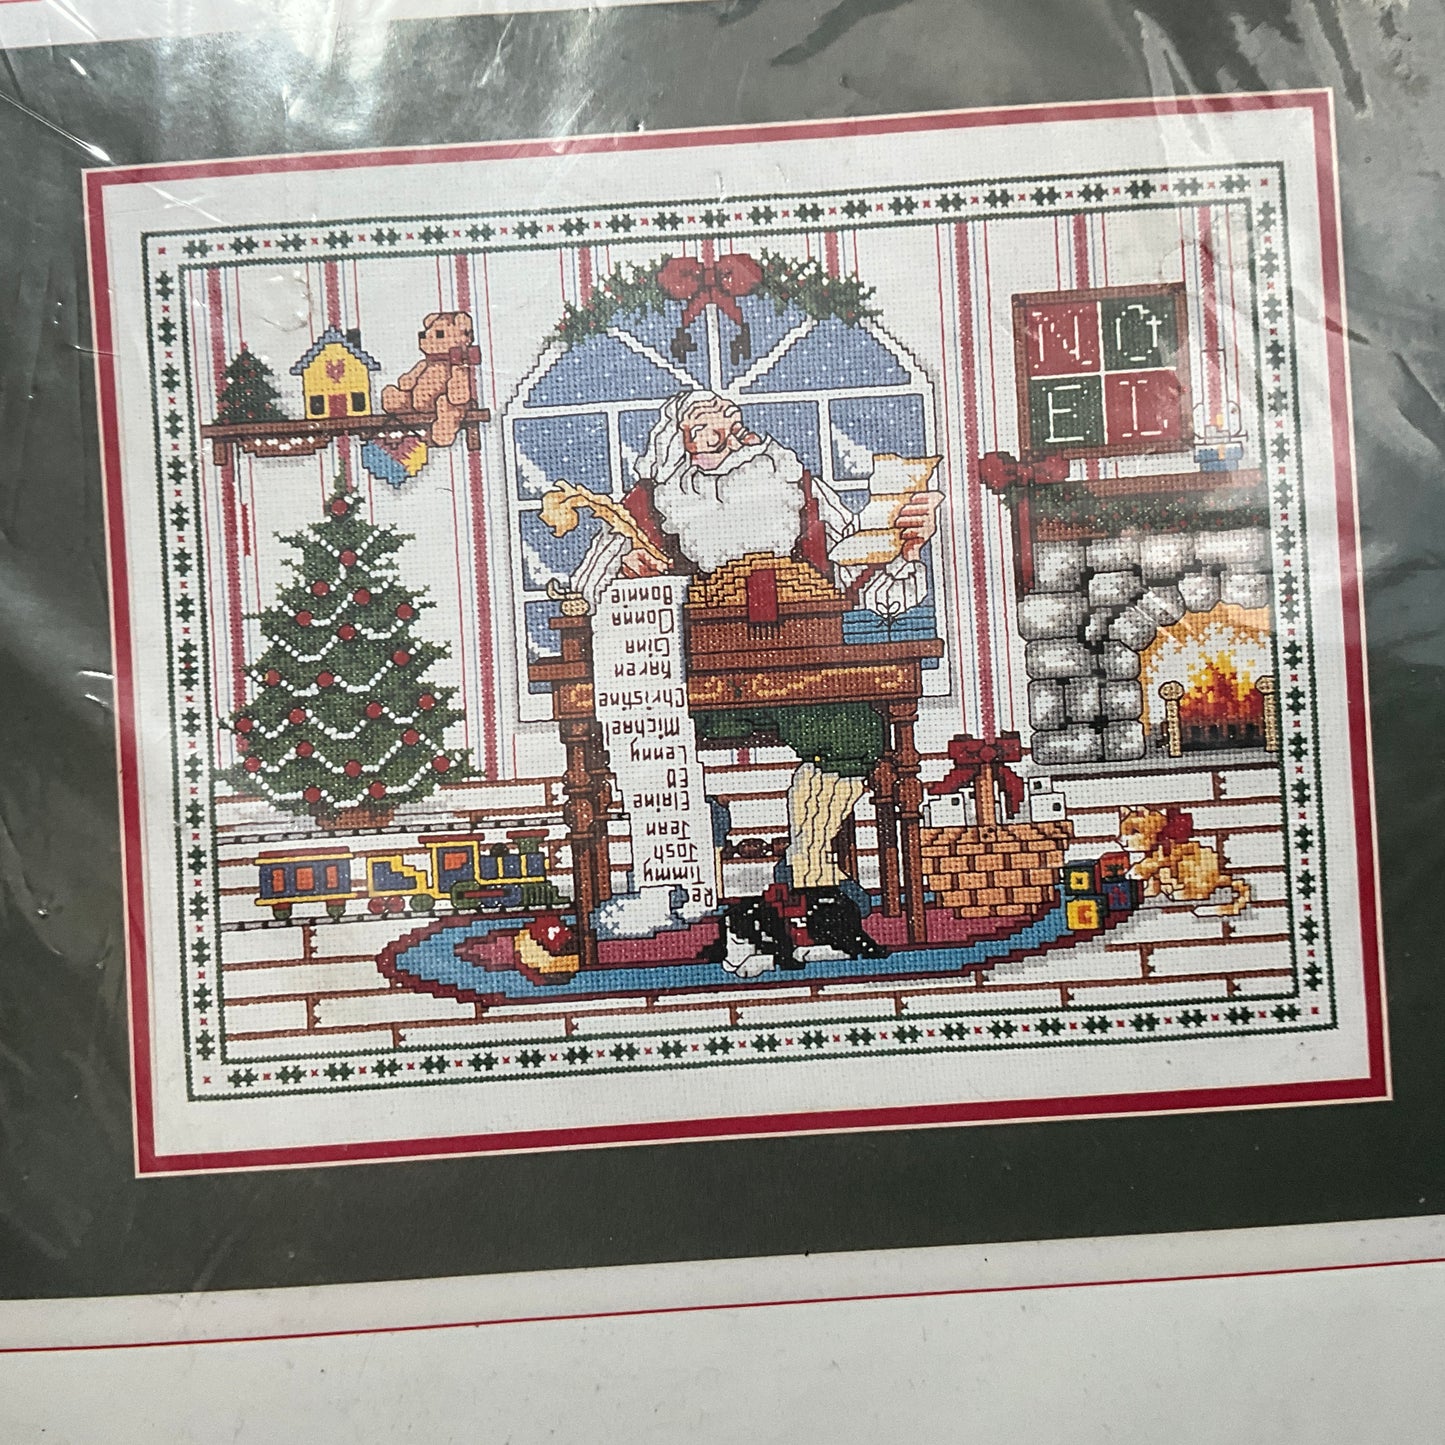 Bucilla Christmas Checking His List vintage 1990 counted cross stitch picture kit*